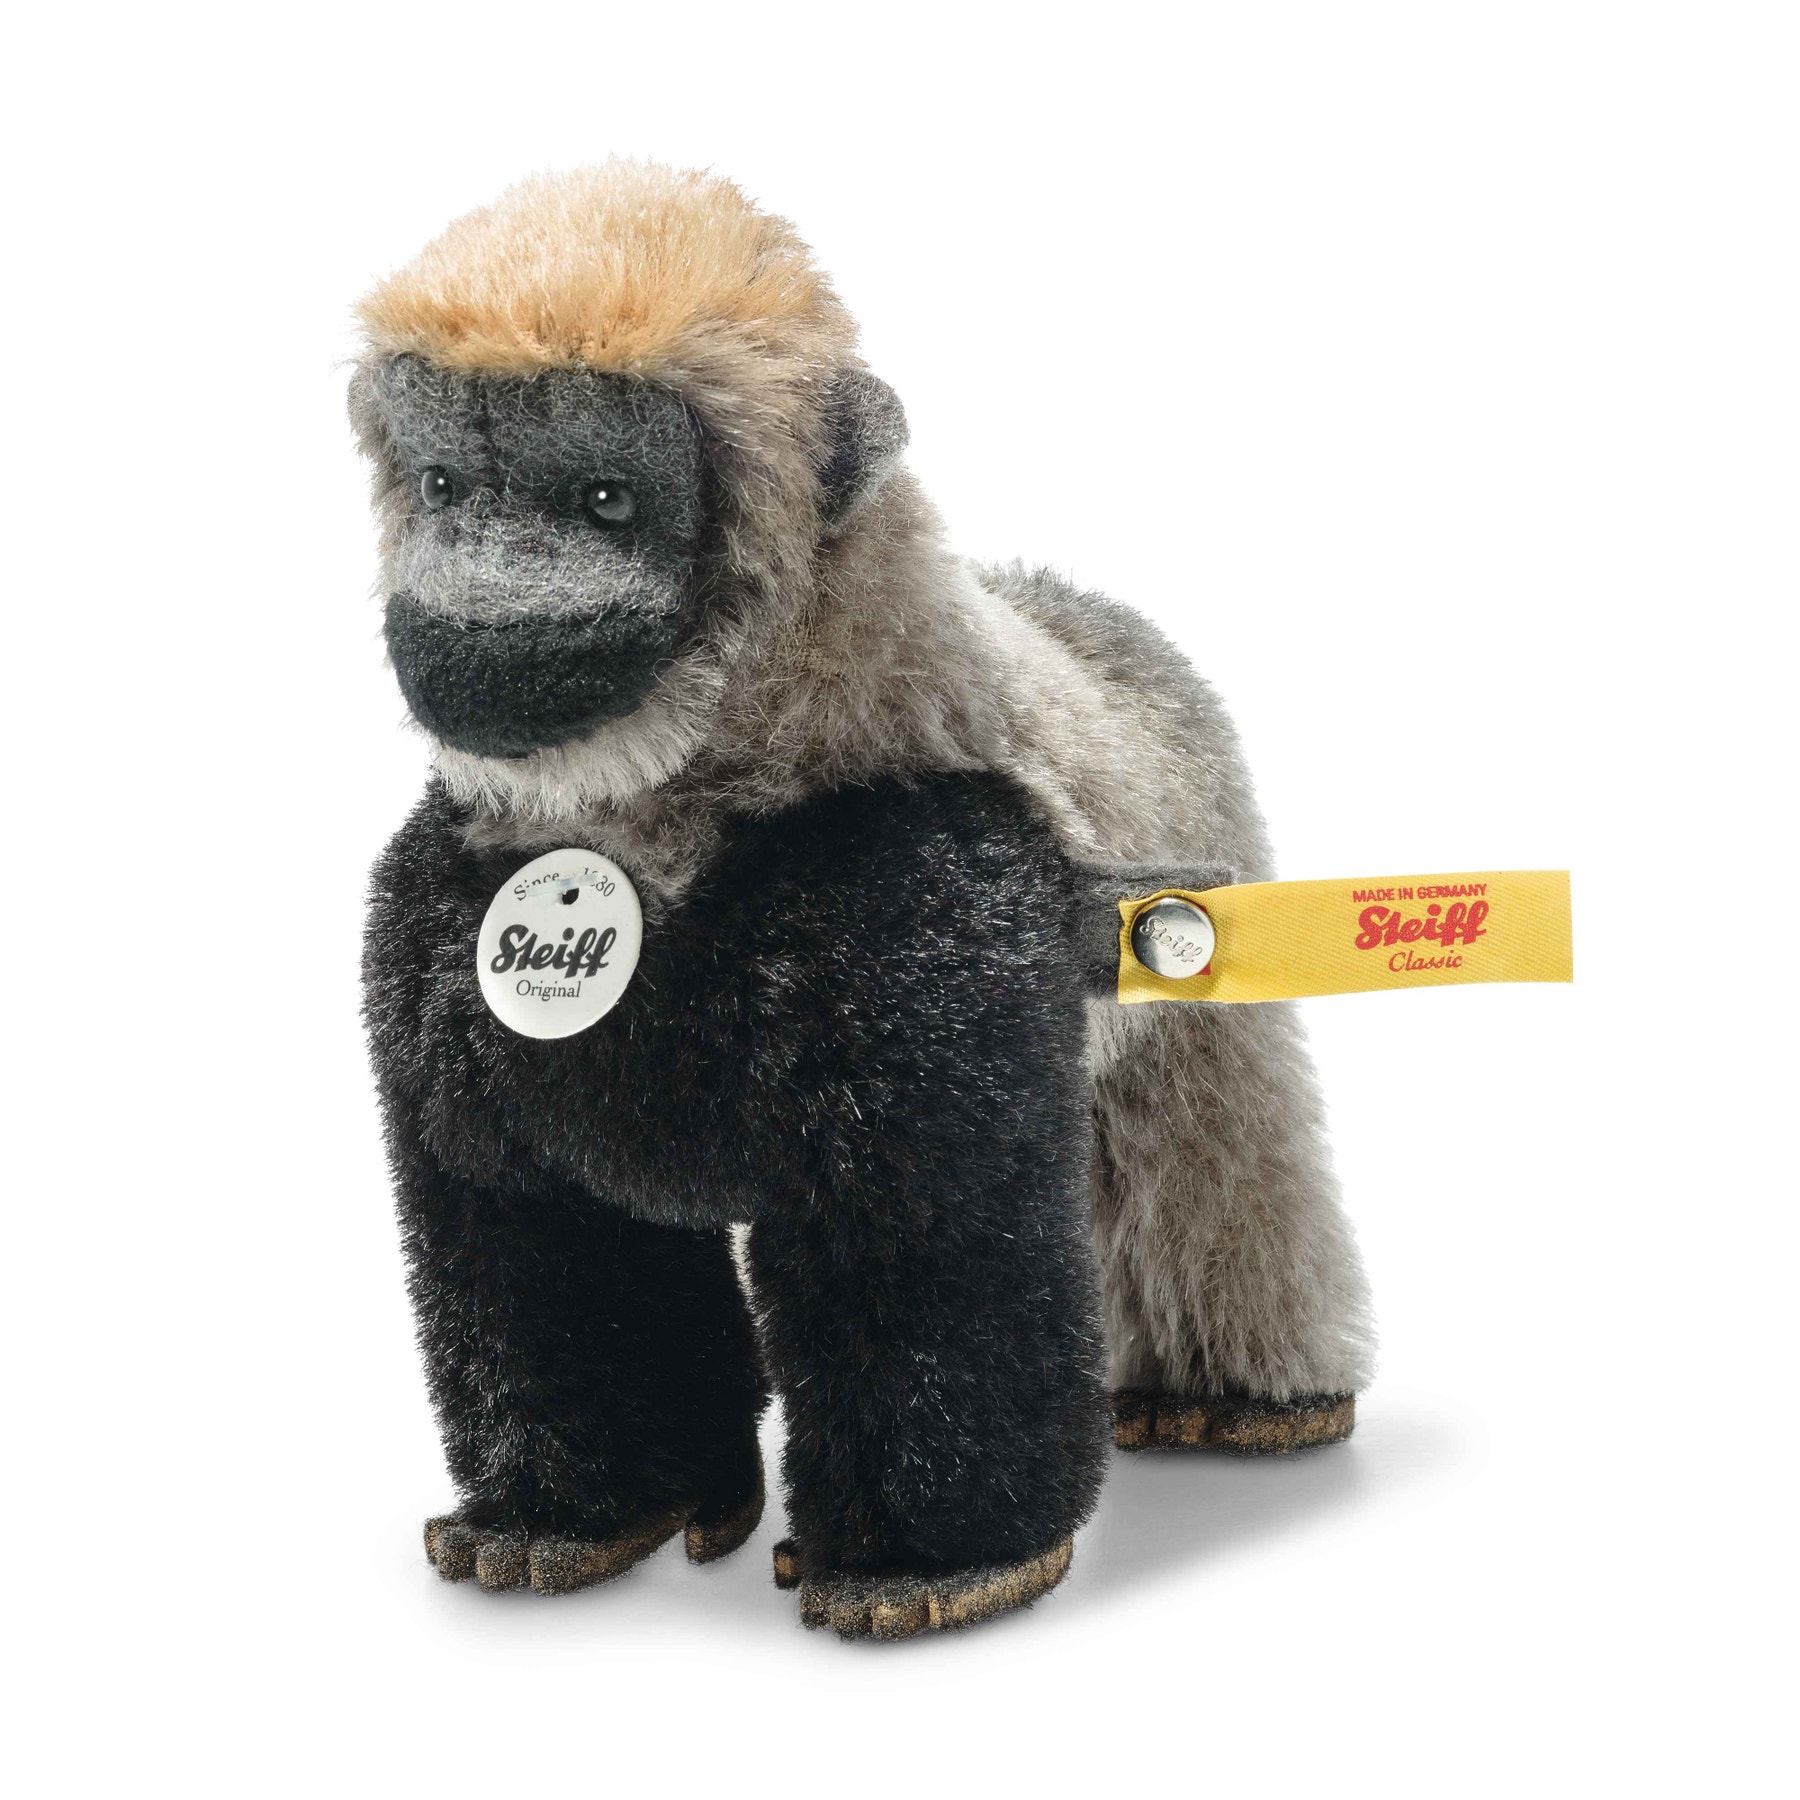 National Geographic Boogie gorilla in gift box